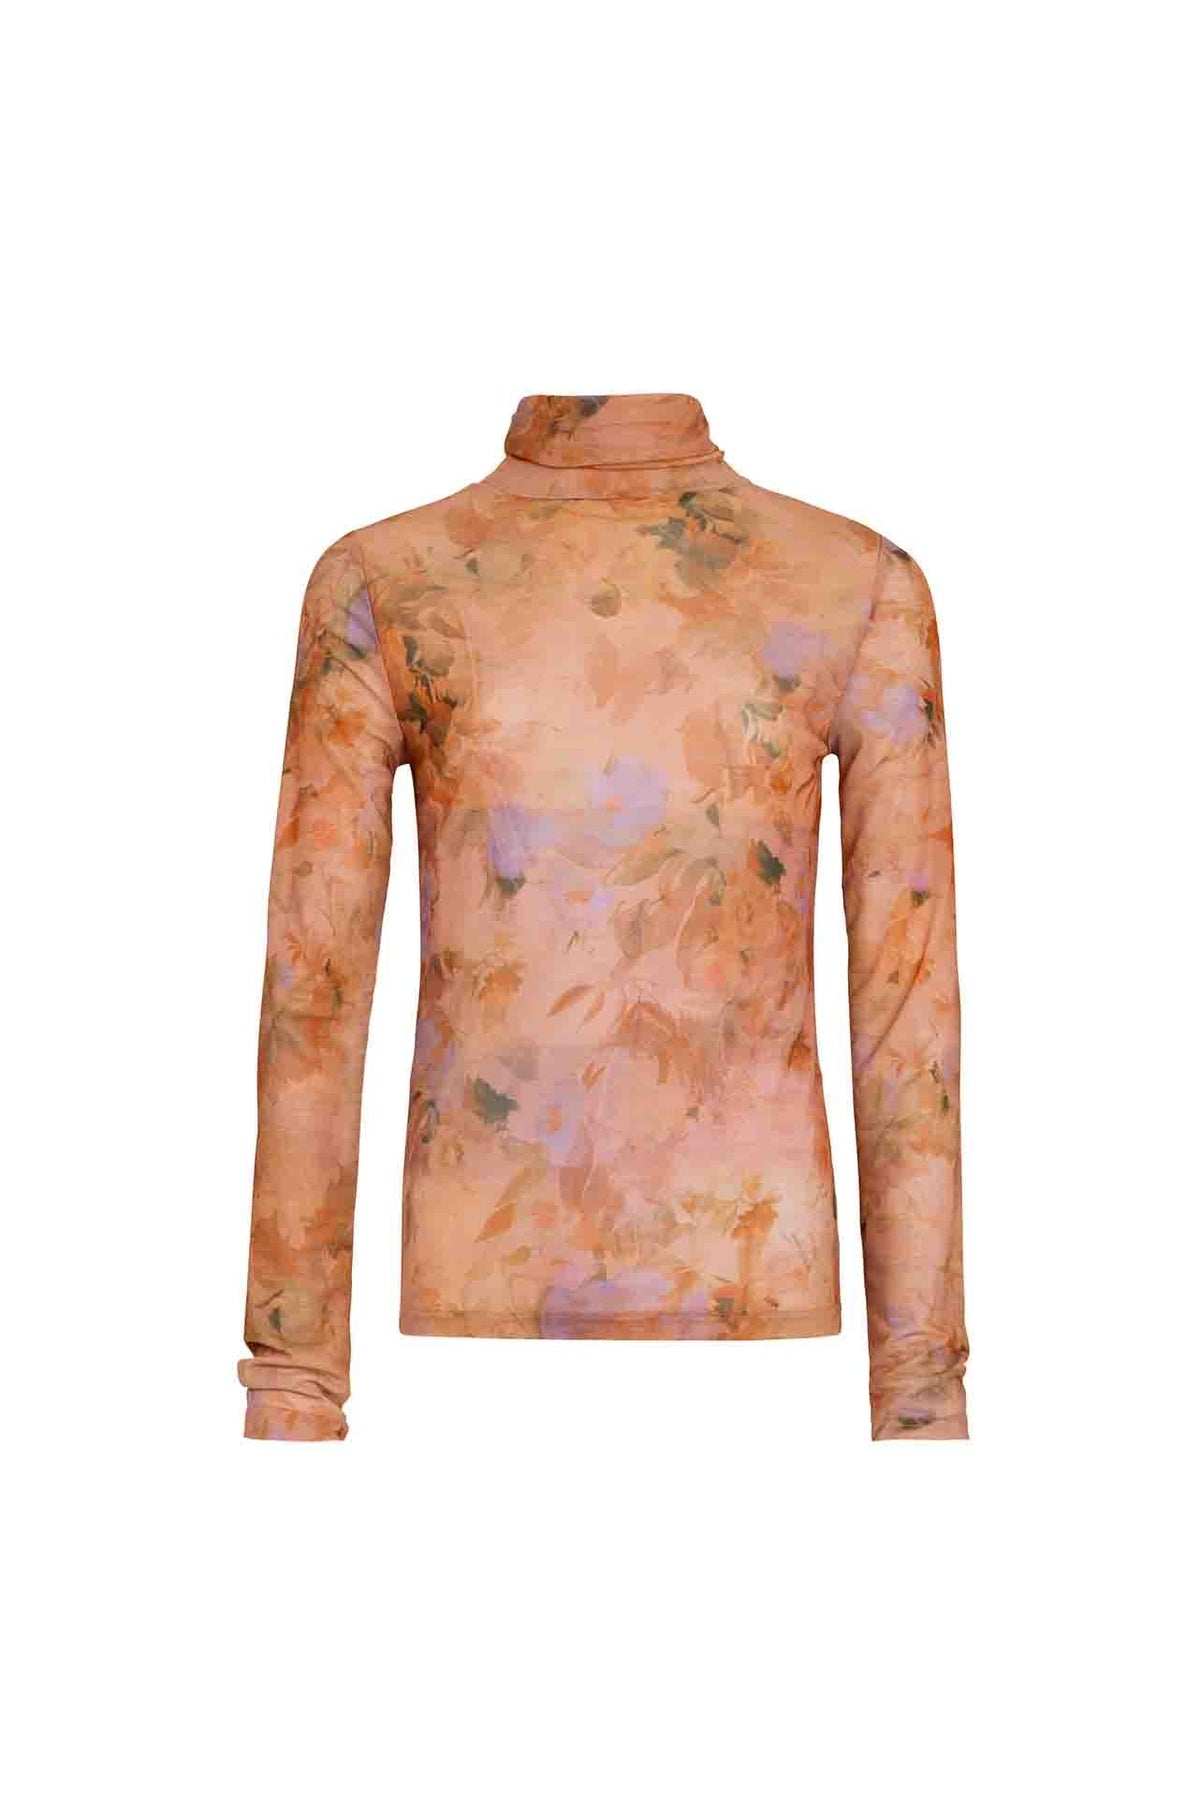 Trelise Cooper - Neck of the Woods Top Peach Floral